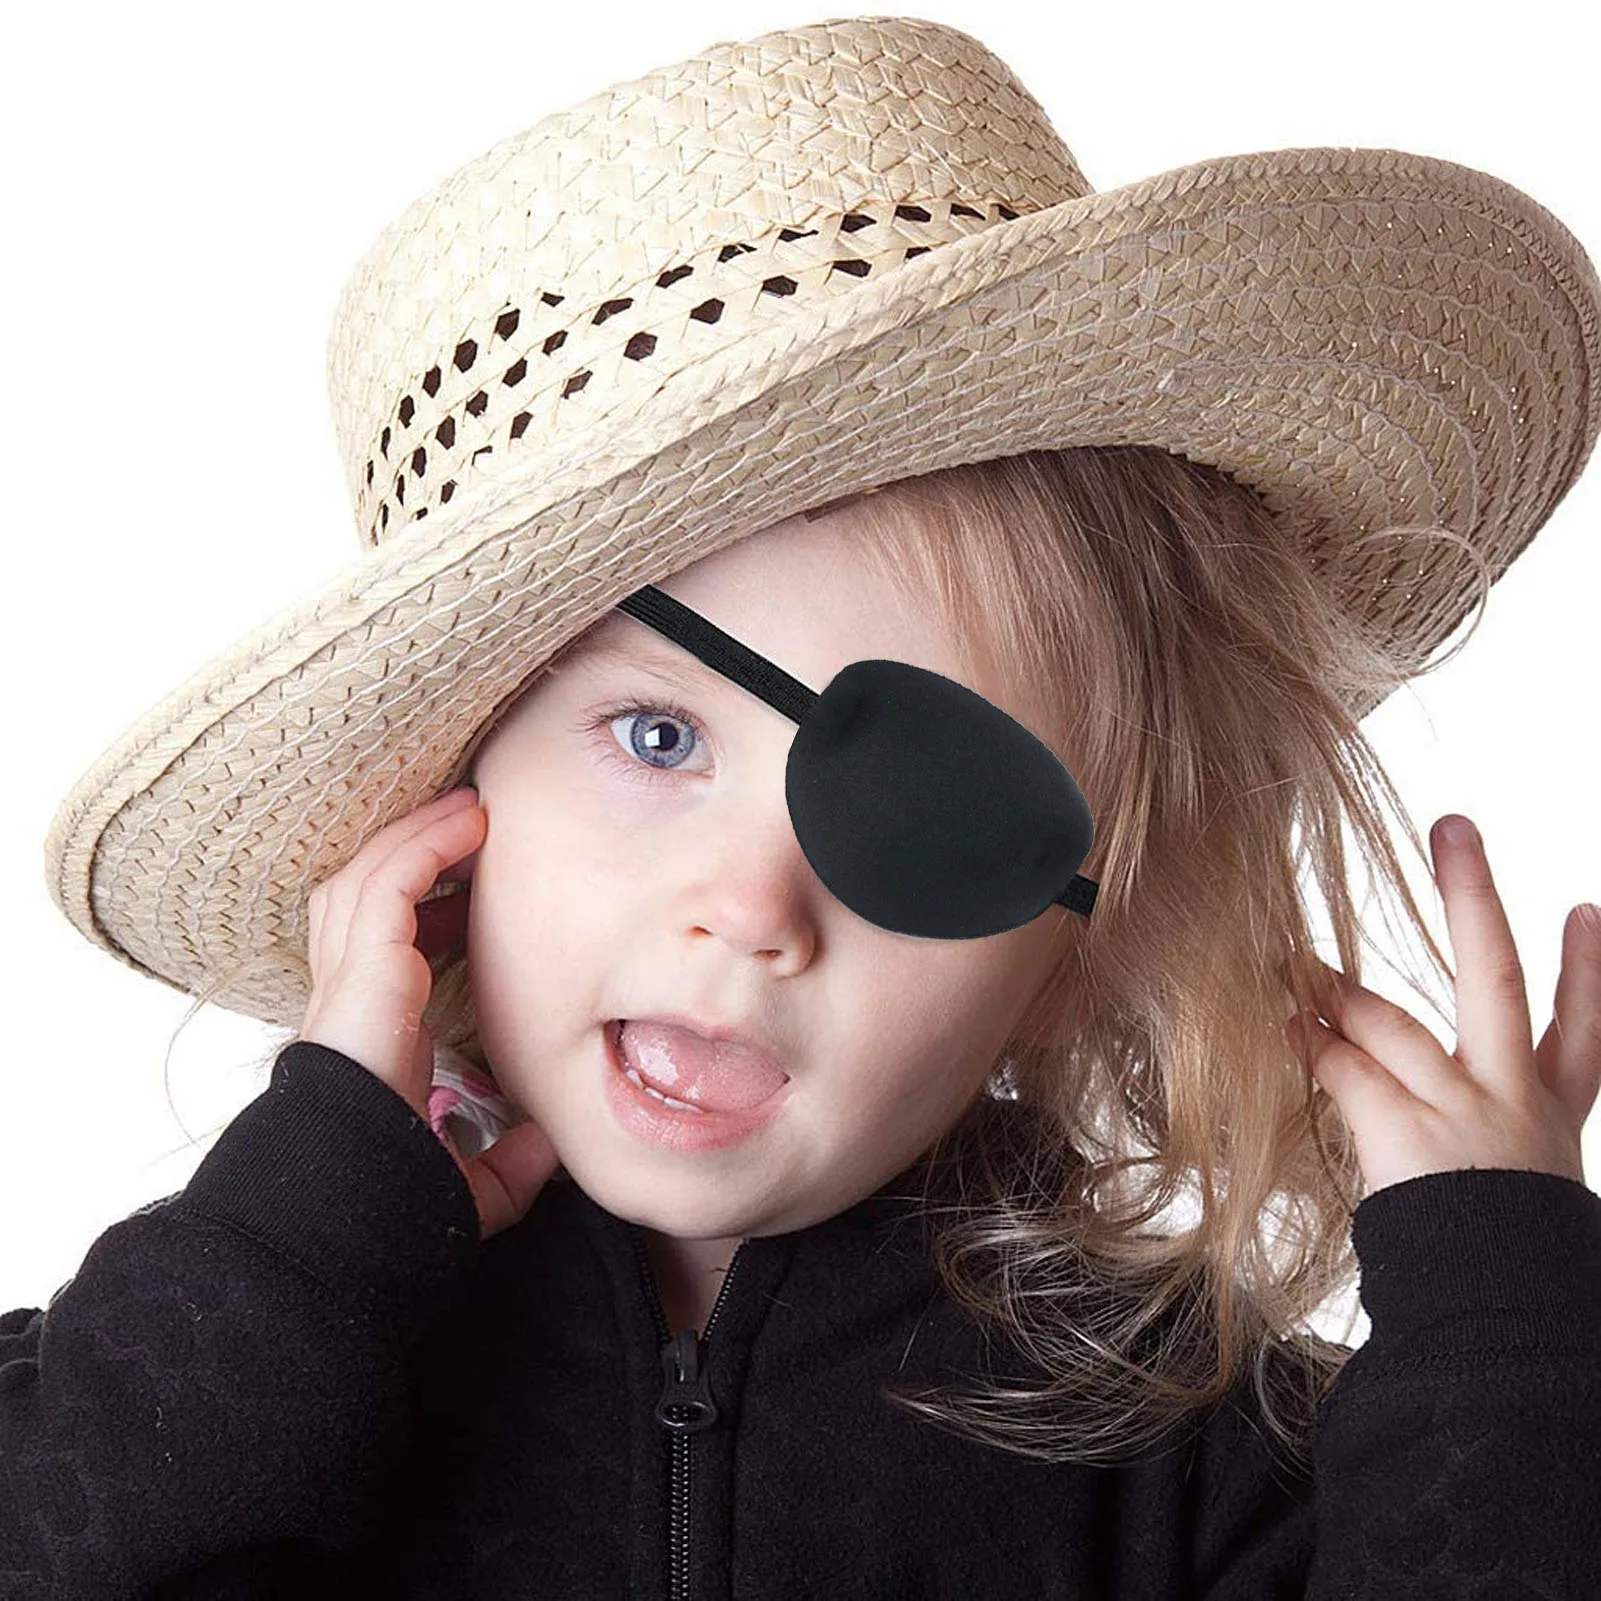 

Pirate Costume Black Eye Patch Soft Comfortable Hand-sewn Single Eye Patches Adjustable 3D Groove Cosplay Prop Accessories